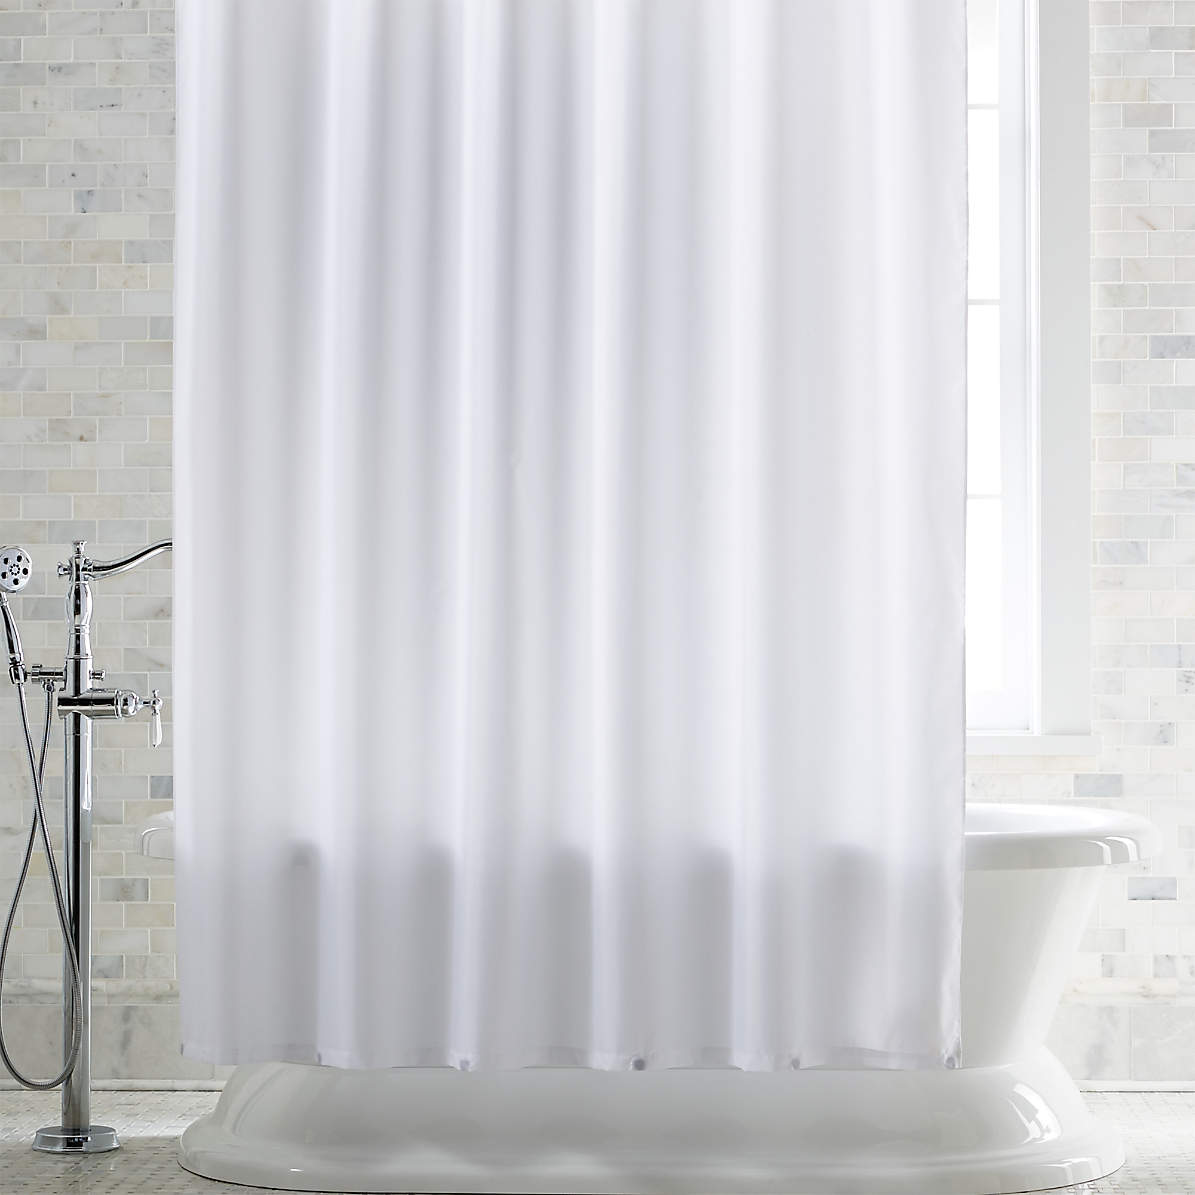 White Shower Curtain Liner With Magnets, Can You Use Fabric Shower Curtain Without Liner